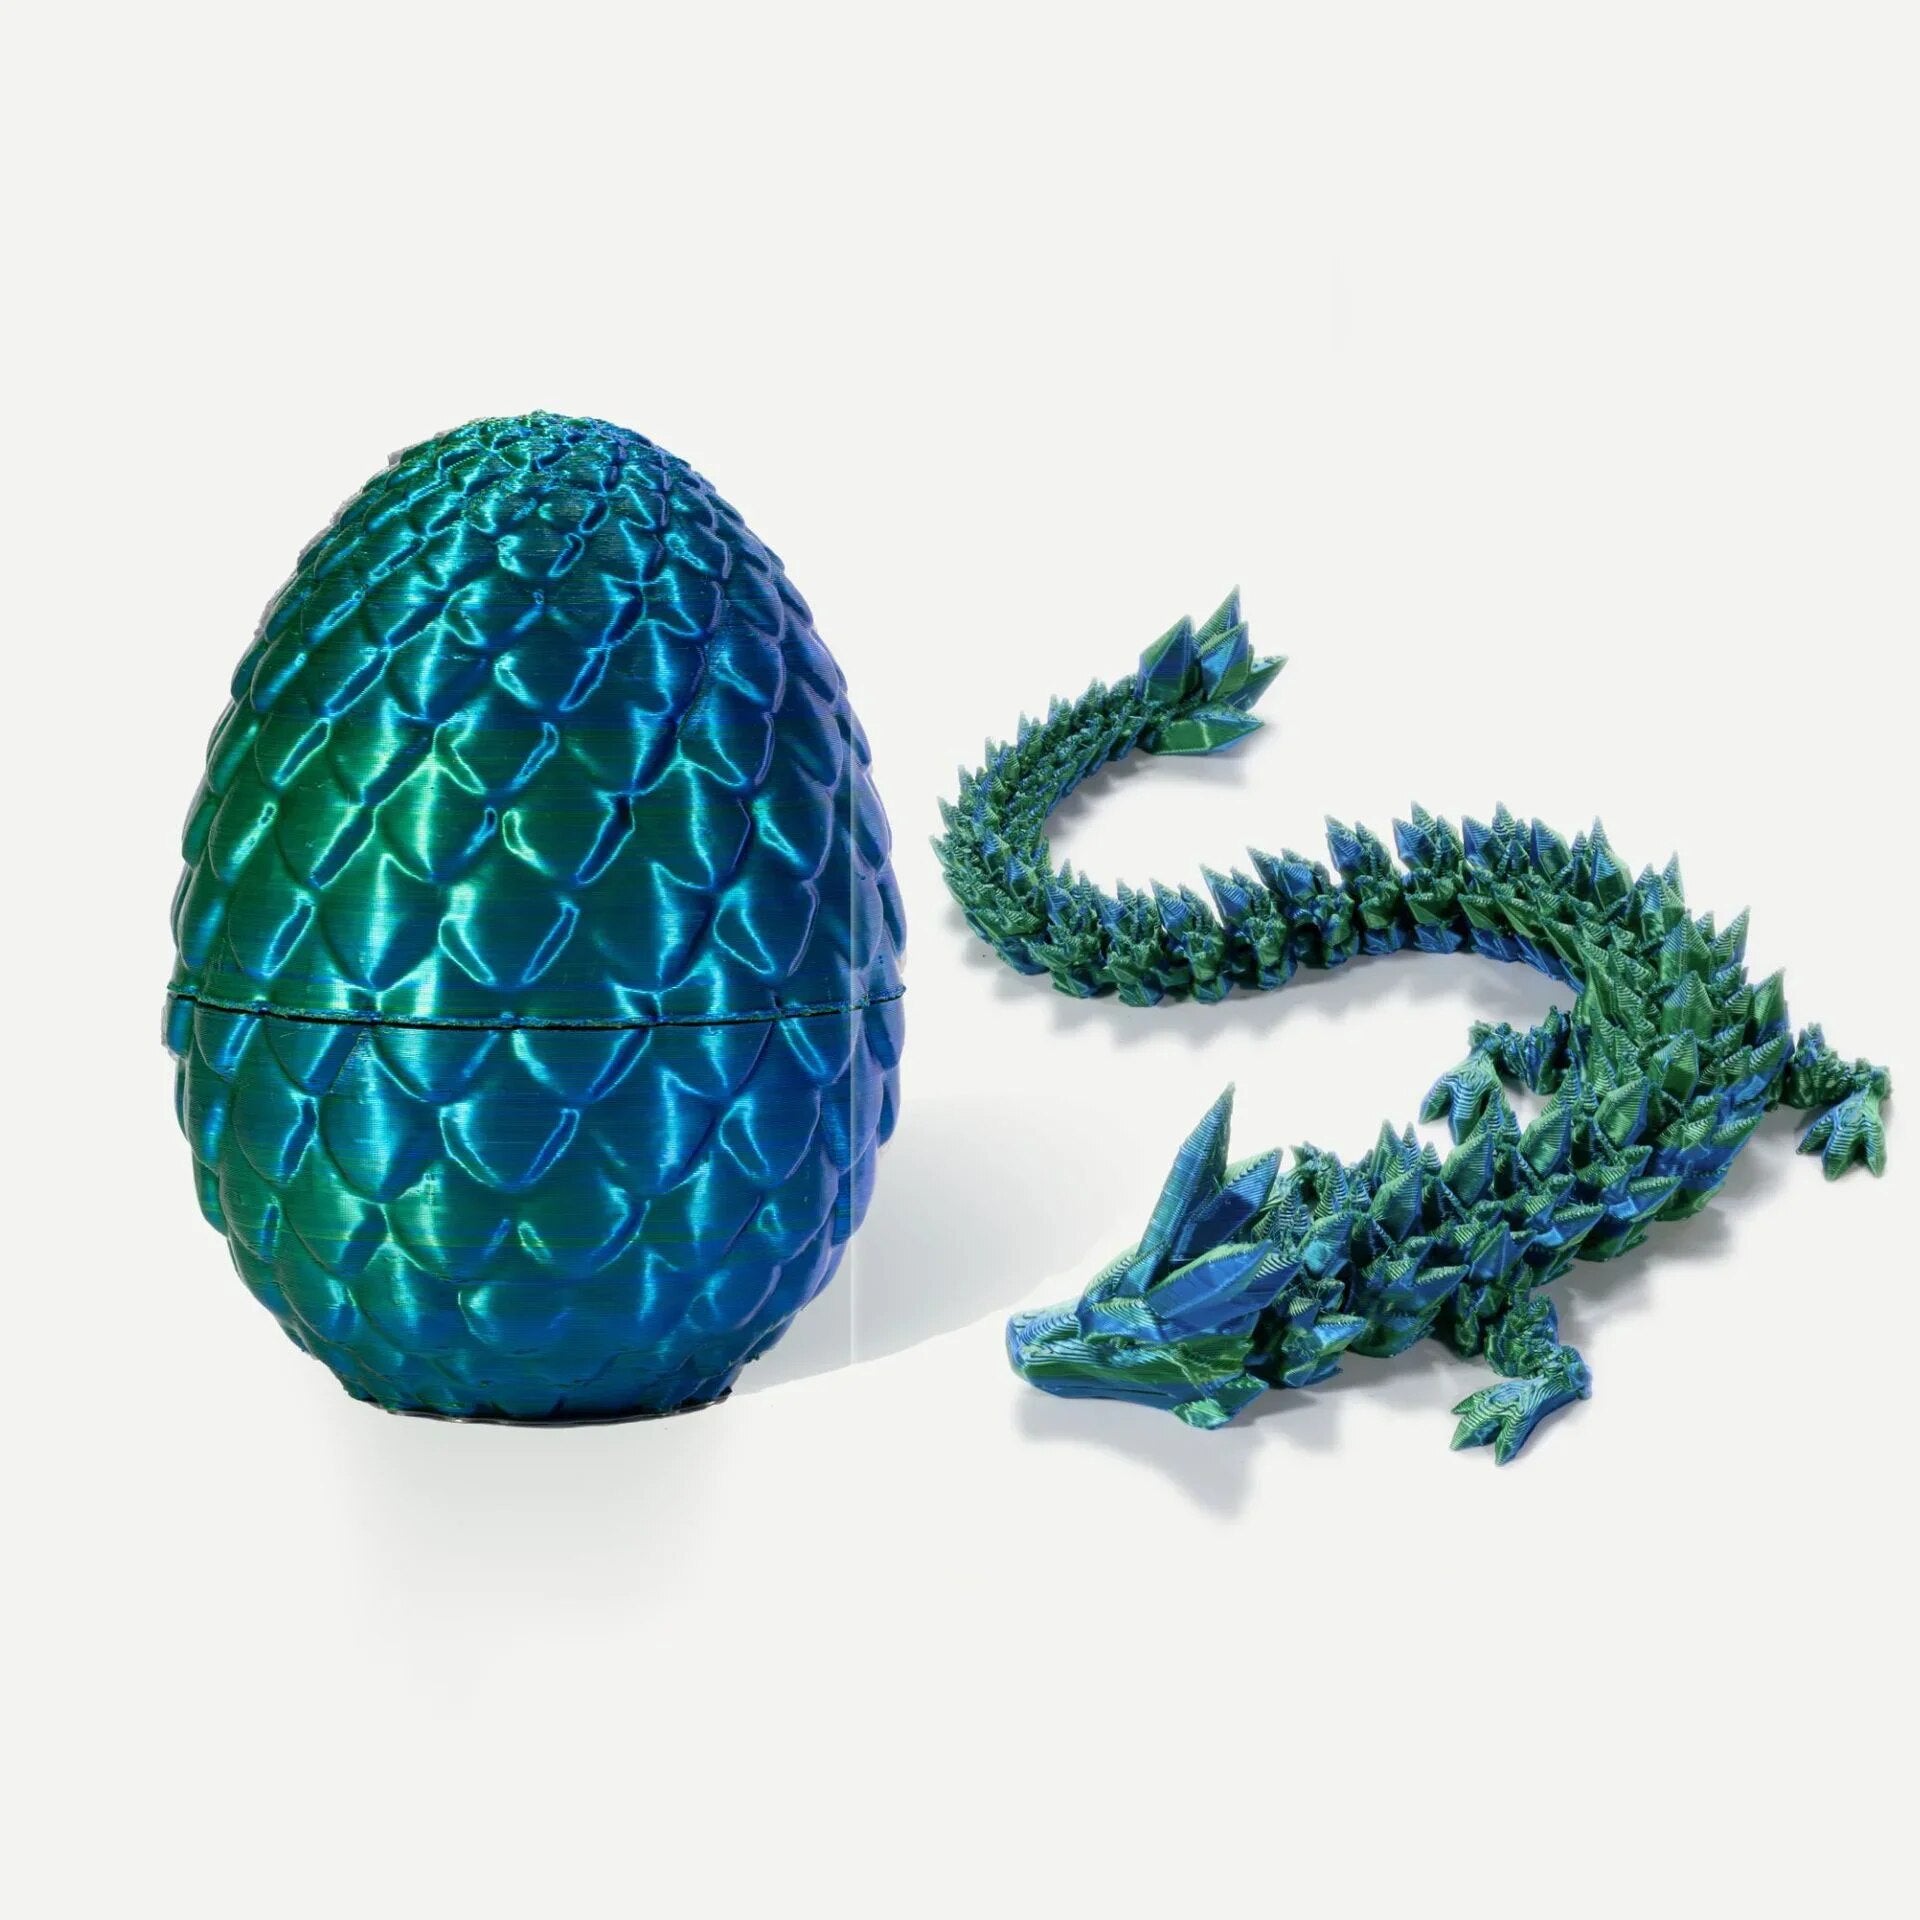 3D Printed Articulated Dragon & Egg (5 Colors)